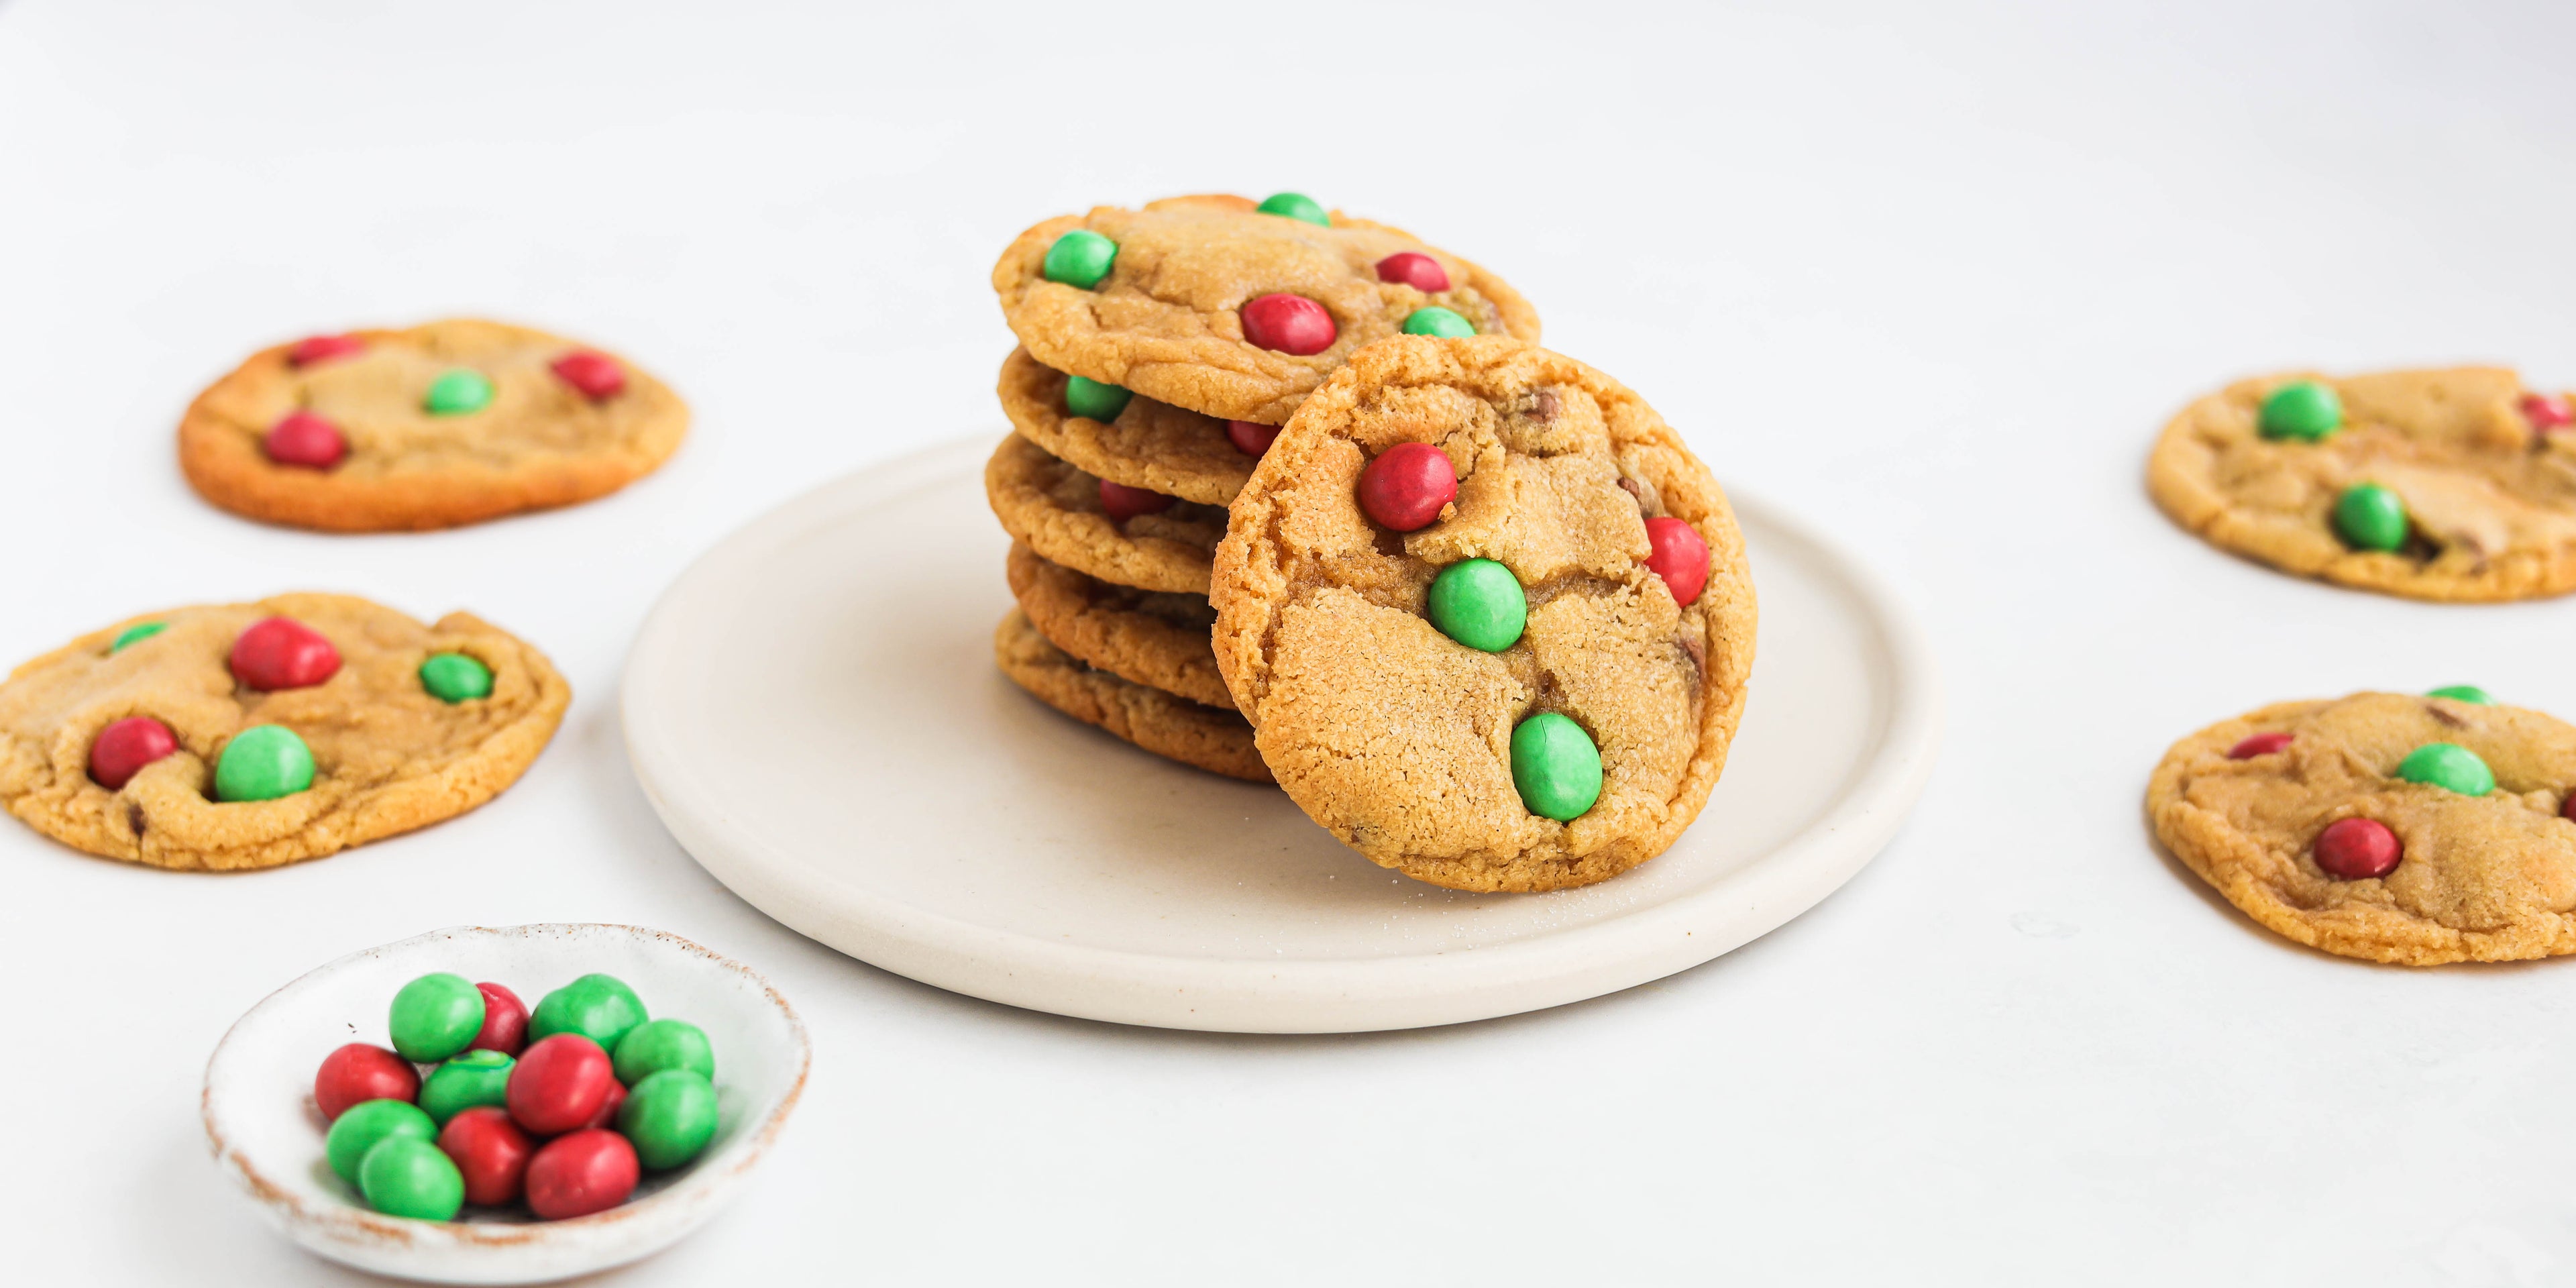 Stack of Copycat Millies Cookies with red and green m&ms for Christmas. Next to a dish of m&ms